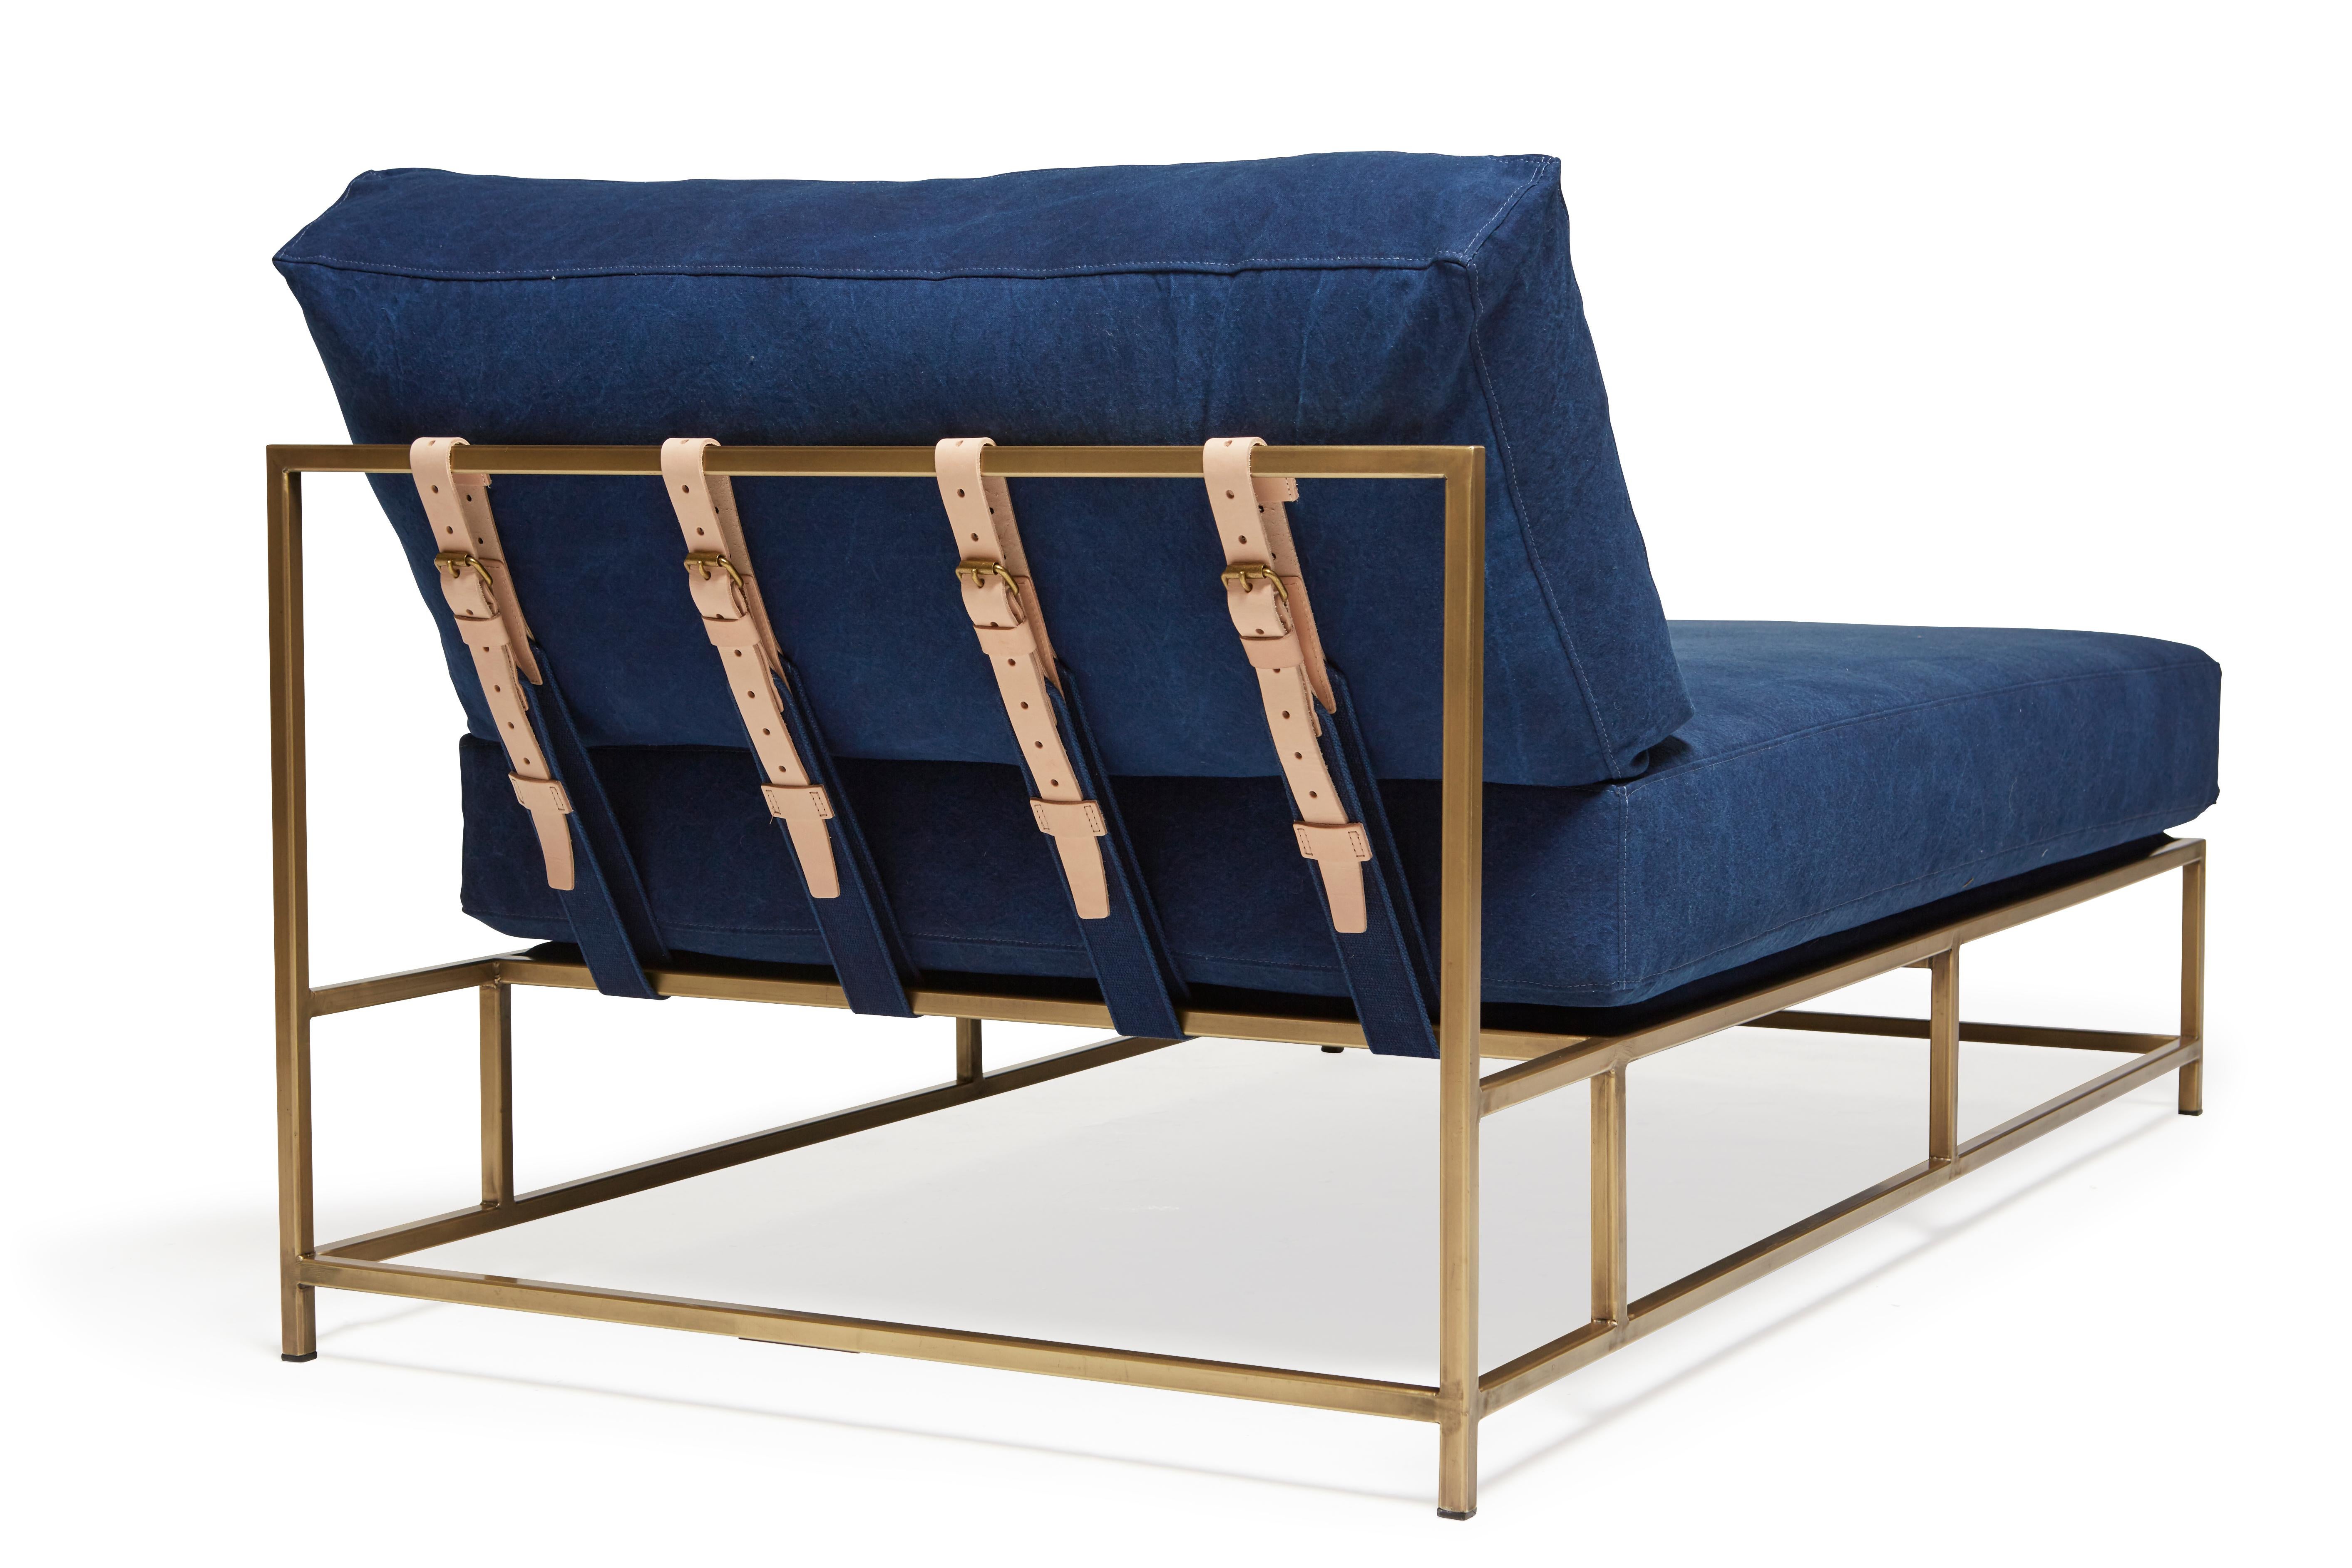 Hand-Dyed Indigo Canvas and Antique Brass Chaise Lounge In New Condition For Sale In Los Angeles, CA